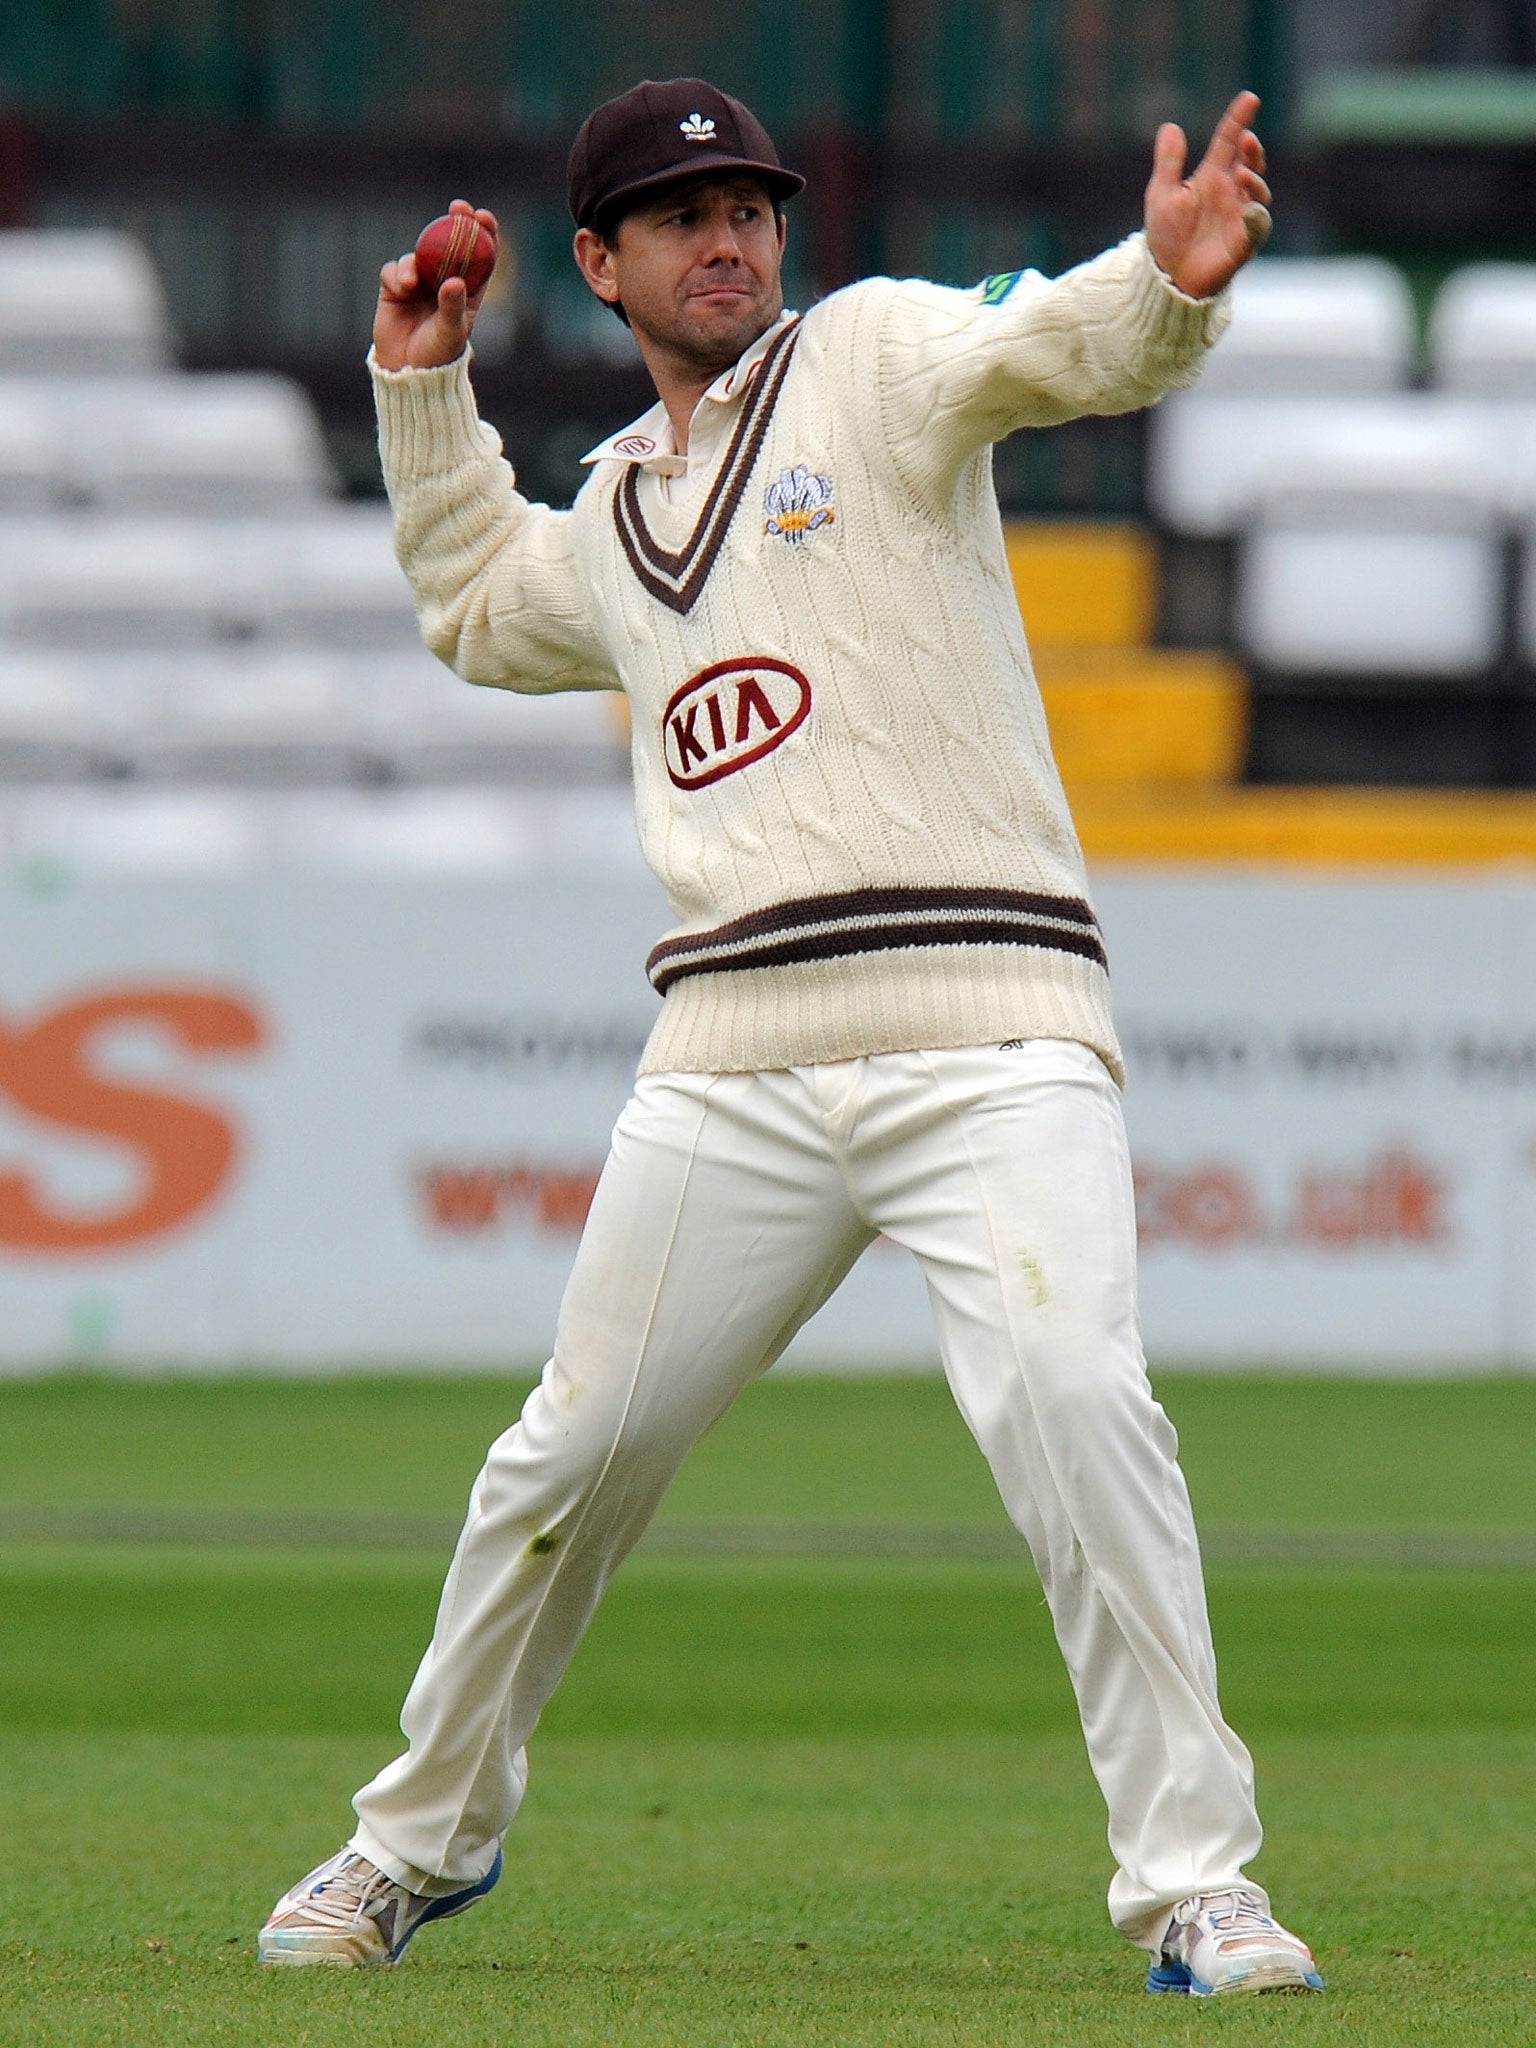 Ricky Ponting’s 192 was not enough to hand Surrey their first win